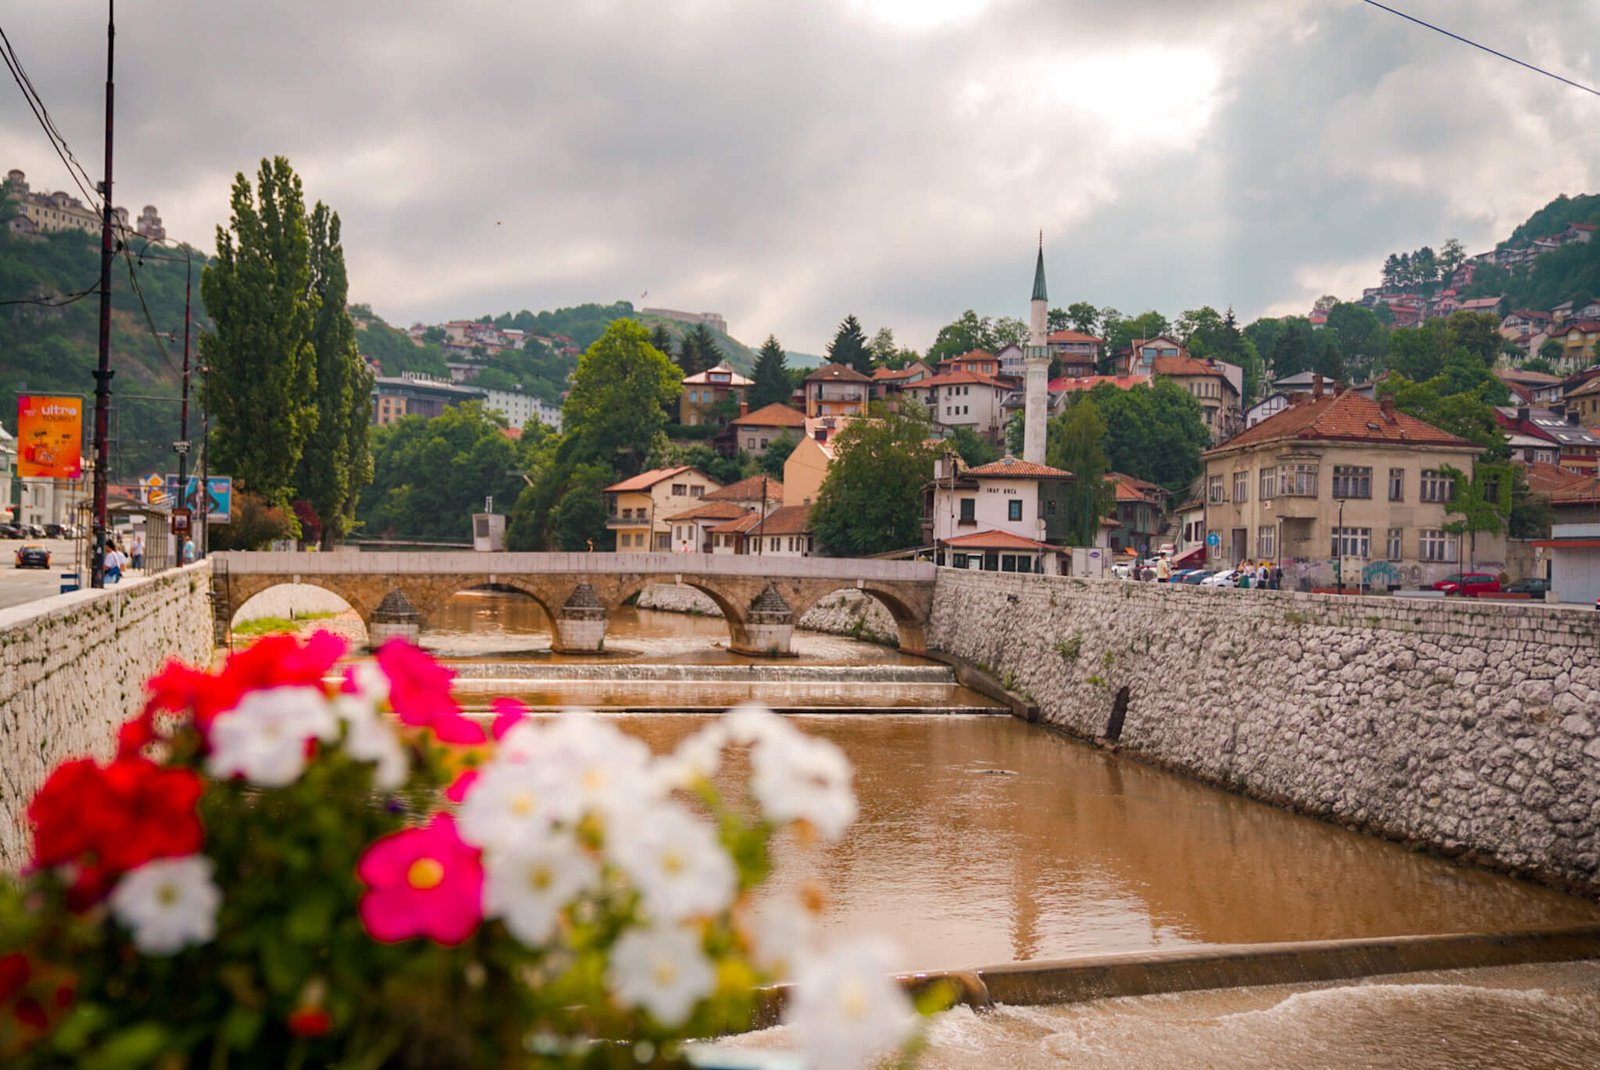 The Old Town of Sarajevo